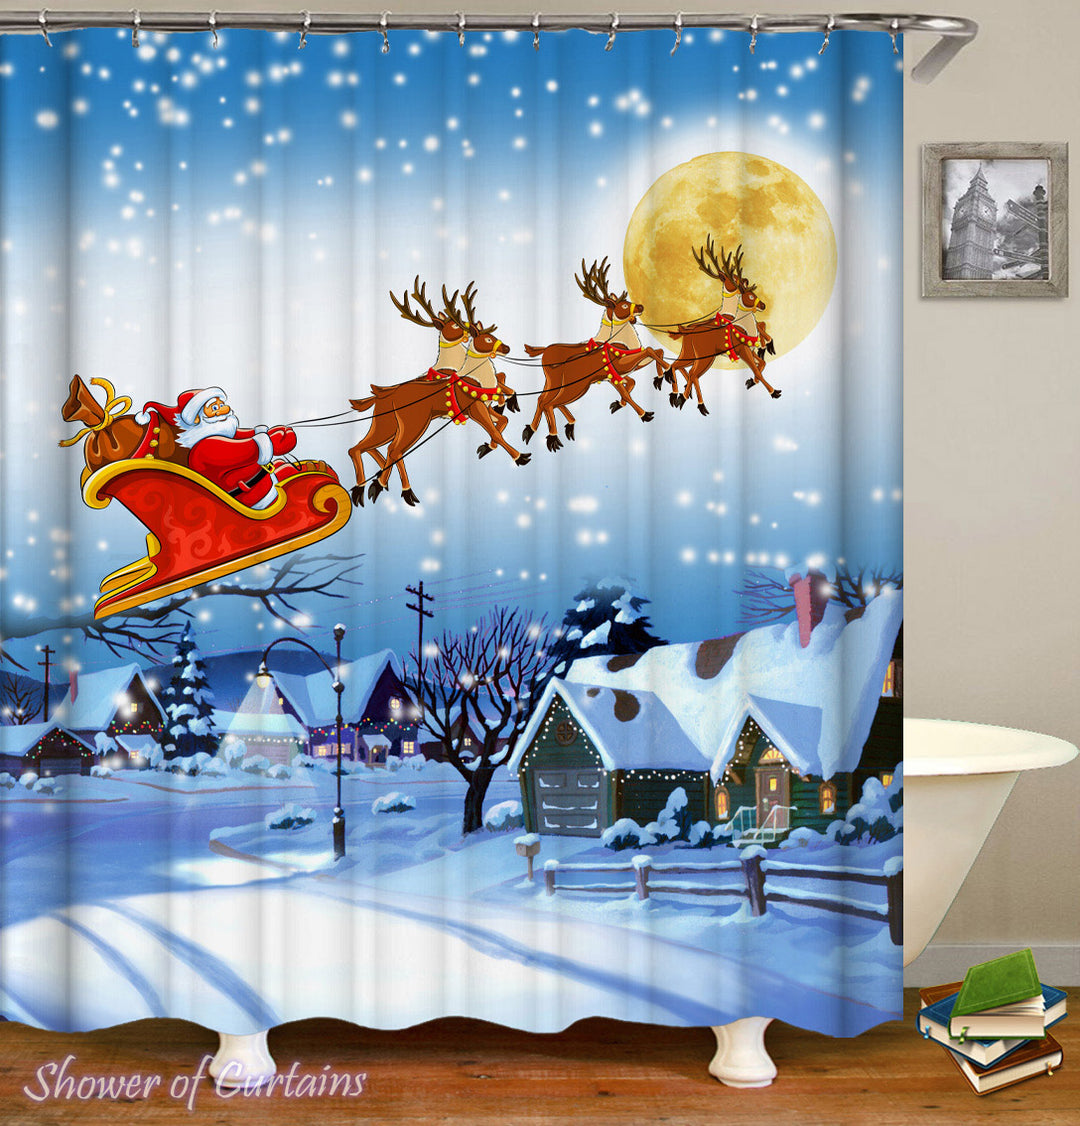 Christmas Shower Curtains Feature Classic Christmas Scene